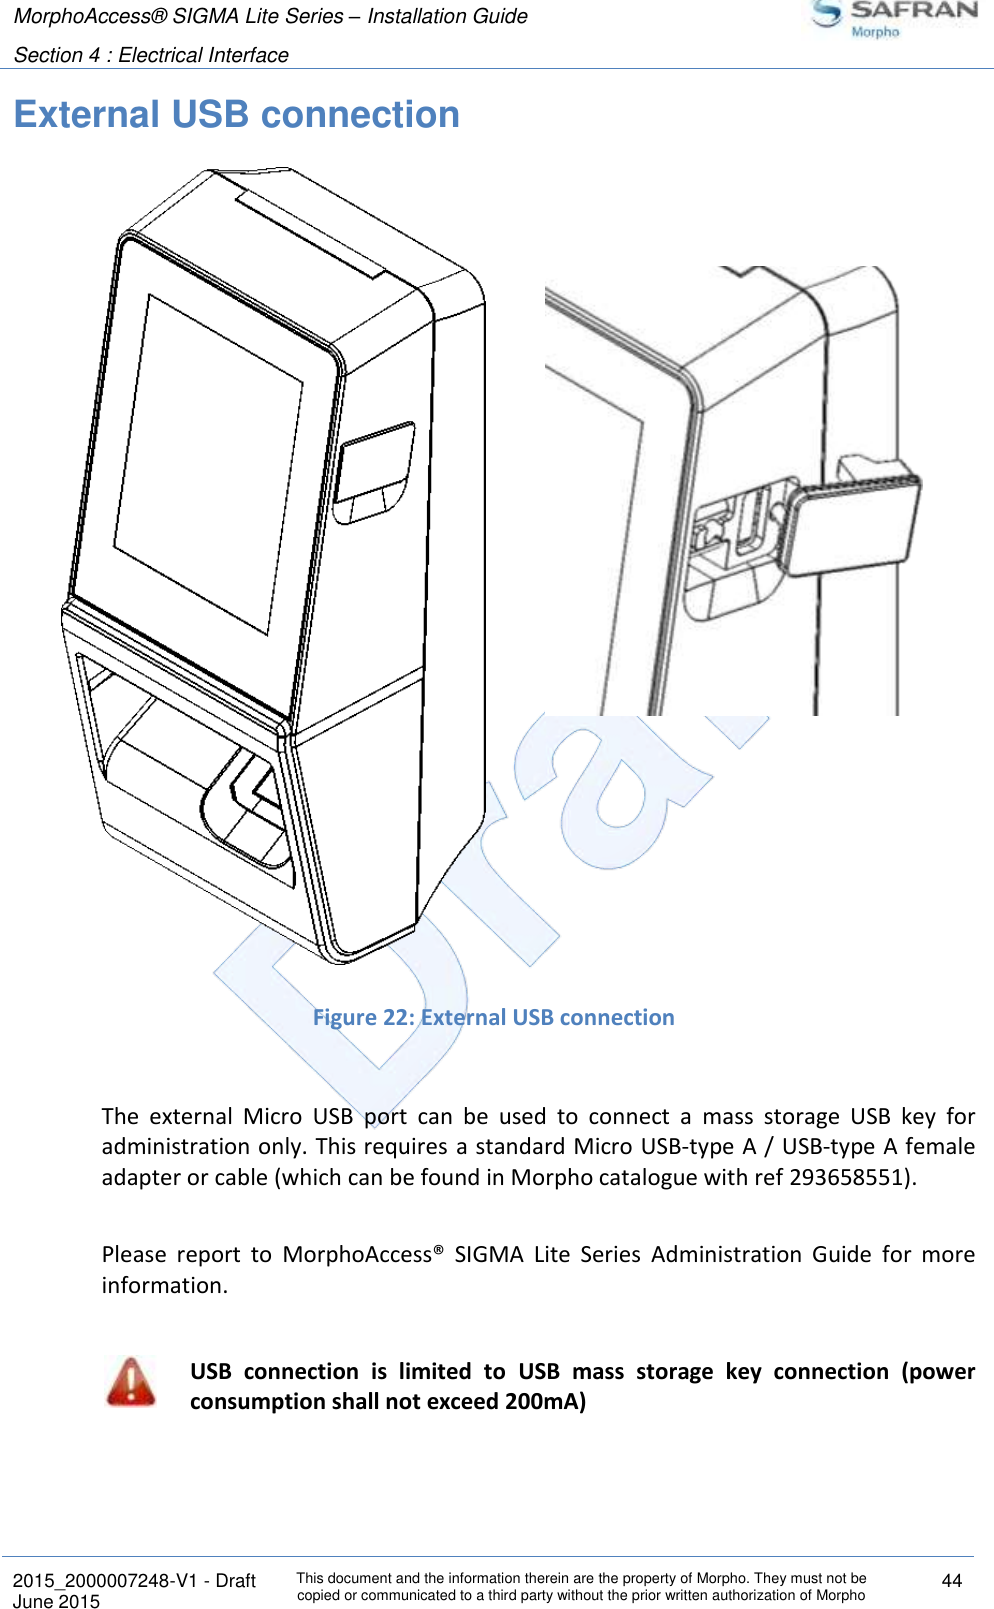 MorphoAccess® SIGMA Lite Series – Installation Guide  Section 4 : Electrical Interface   2015_2000007248-V1 - Draft This document and the information therein are the property of Morpho. They must not be copied or communicated to a third party without the prior written authorization of Morpho 44 June 2015   External USB connection                      Figure 22: External USB connection  The  external  Micro  USB  port  can  be  used  to  connect  a  mass  storage  USB  key  for administration only. This requires  a standard Micro USB-type A / USB-type A female adapter or cable (which can be found in Morpho catalogue with ref 293658551).  Please  report  to  MorphoAccess®  SIGMA  Lite  Series  Administration  Guide  for  more information.   USB  connection  is  limited  to  USB  mass  storage  key  connection  (power consumption shall not exceed 200mA)    